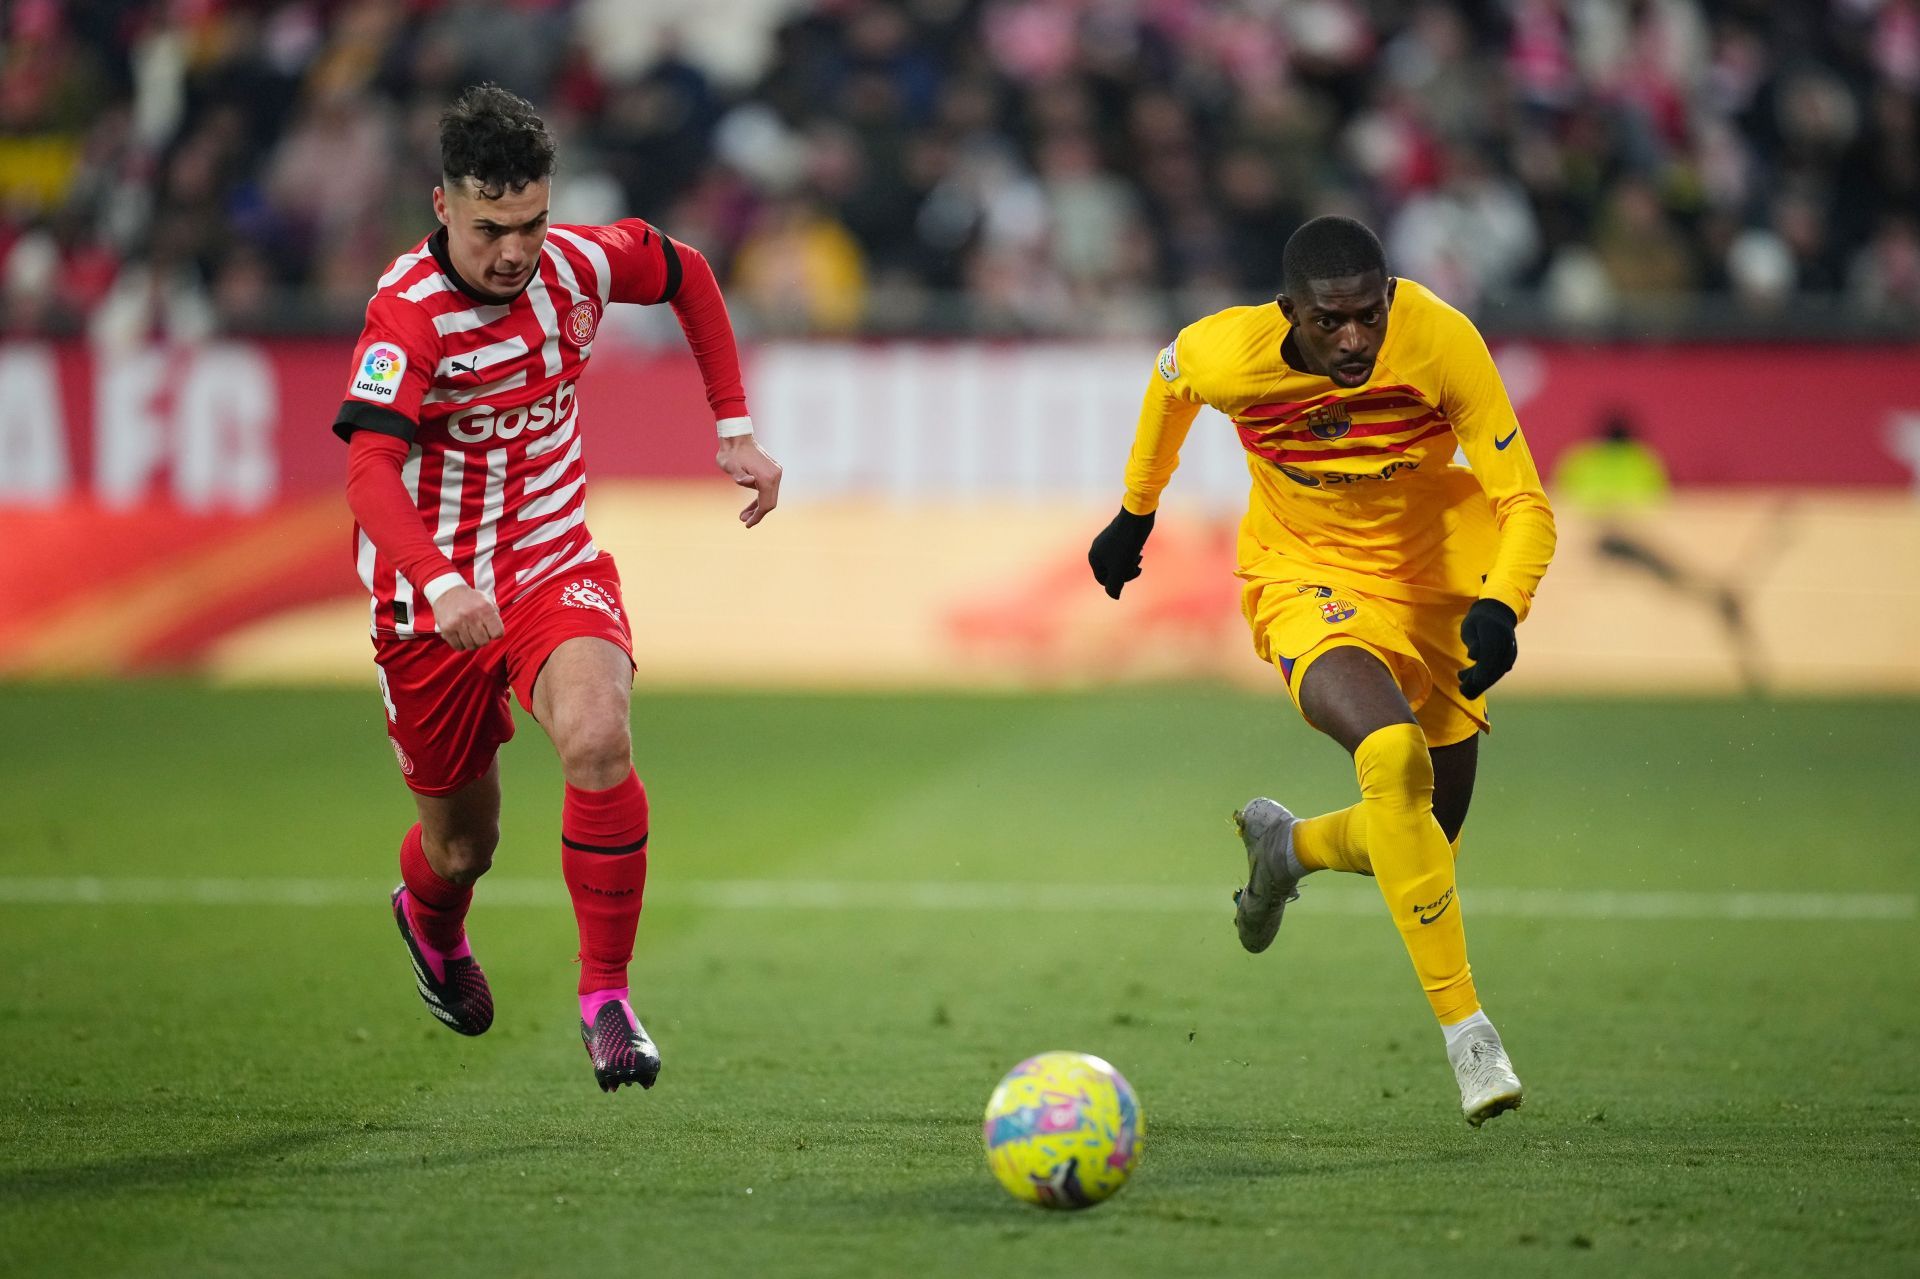 Bayern Munich target Ousmane Dembele is fast, two-footed, and a world-class dribbler.